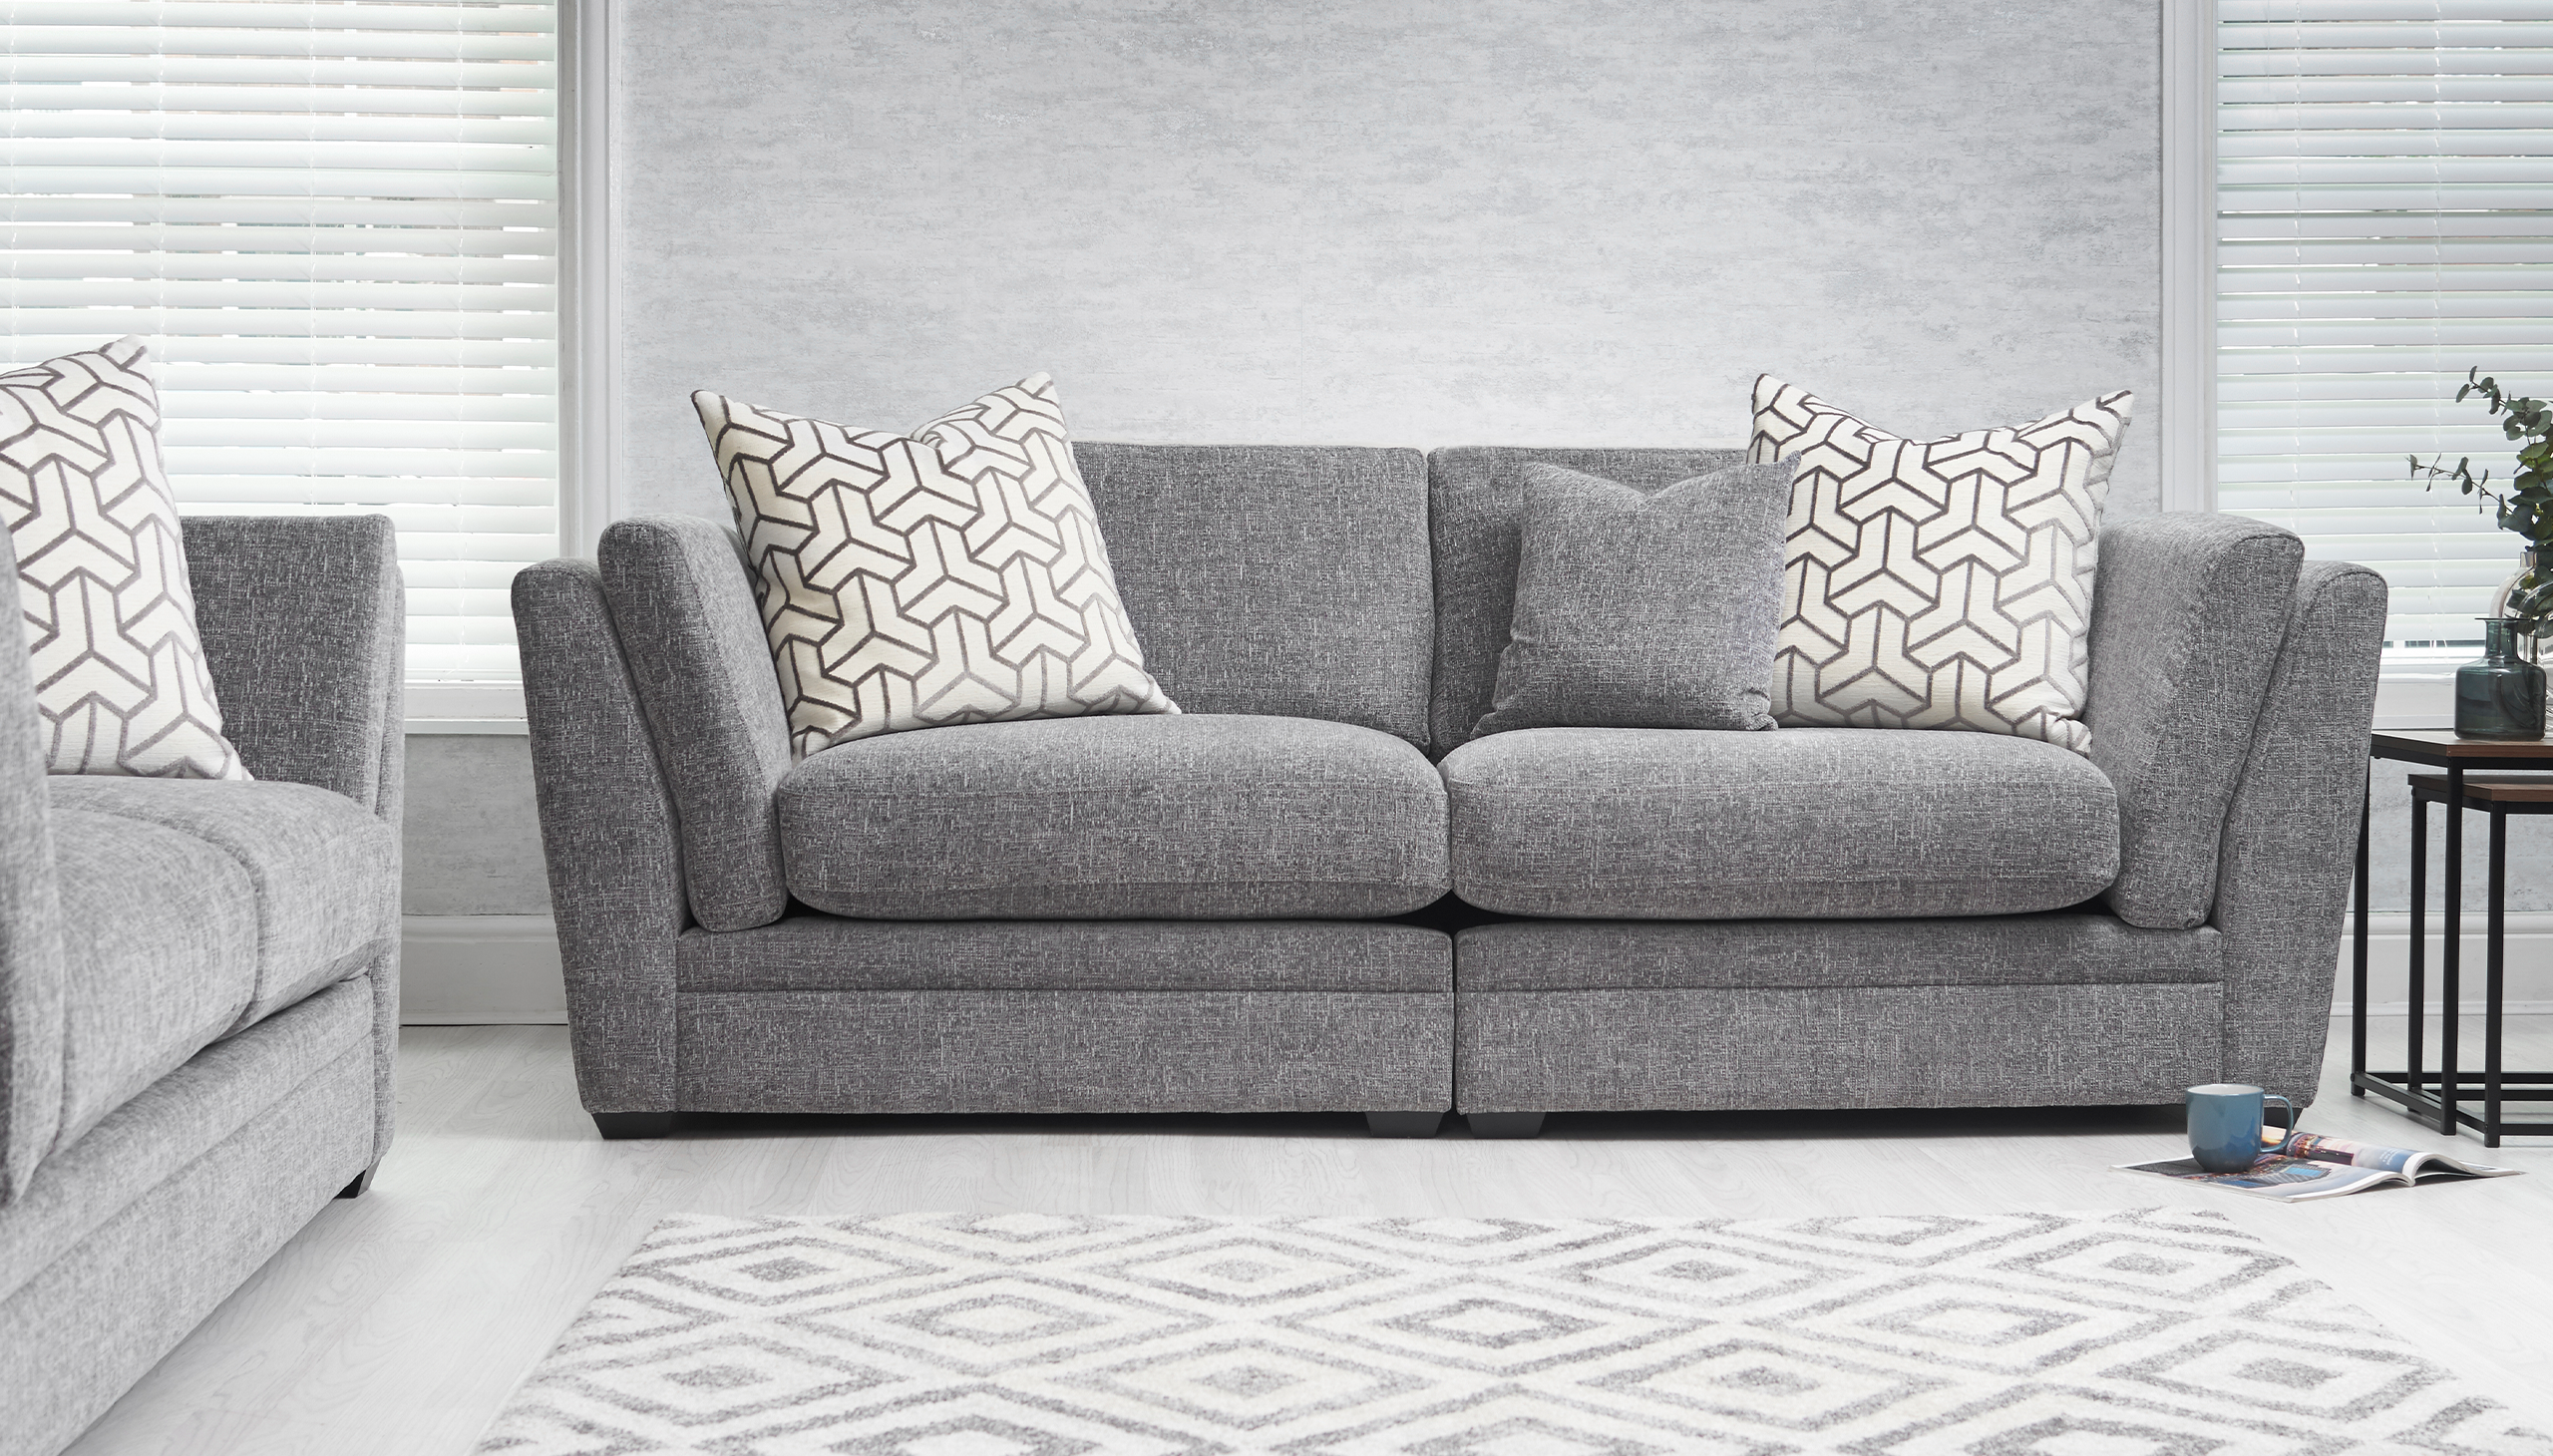 Creed 4 Seater Chaise Sofa